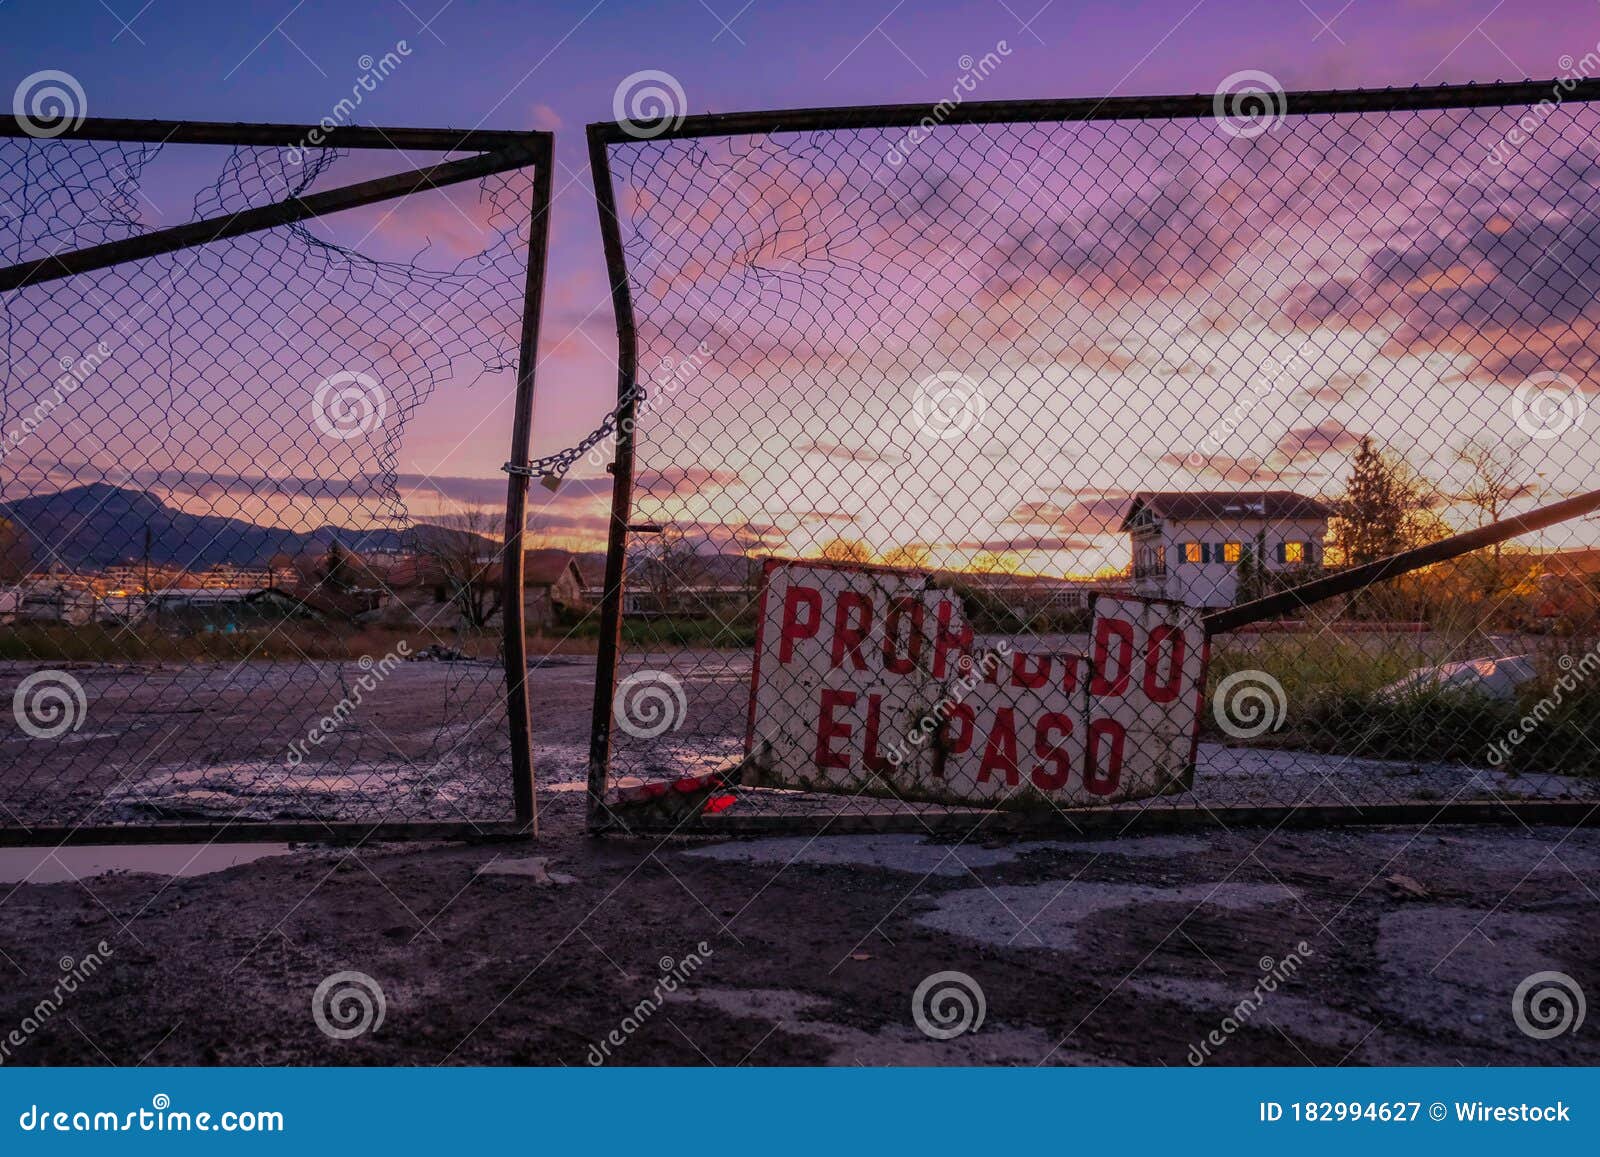 prohibido el paso sign on an old fence during sunset